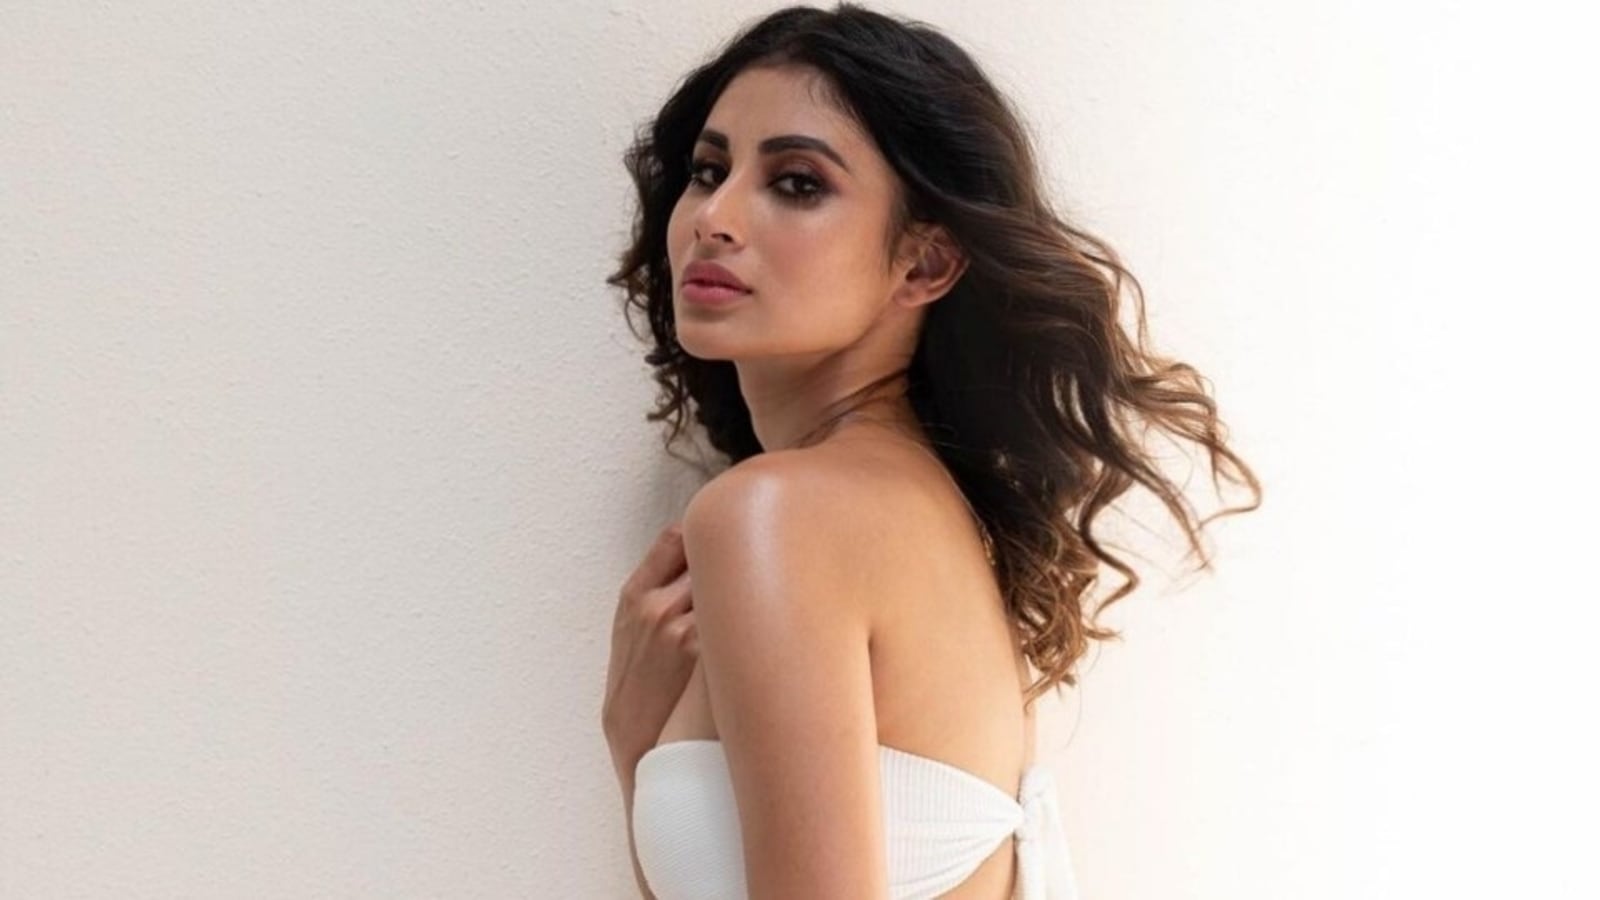 Monali Roy Xxx Video - Mouni Roy drops a smoking hot look in white bikini and fringed skirt, sets  Instagram on fire | Fashion Trends - Hindustan Times